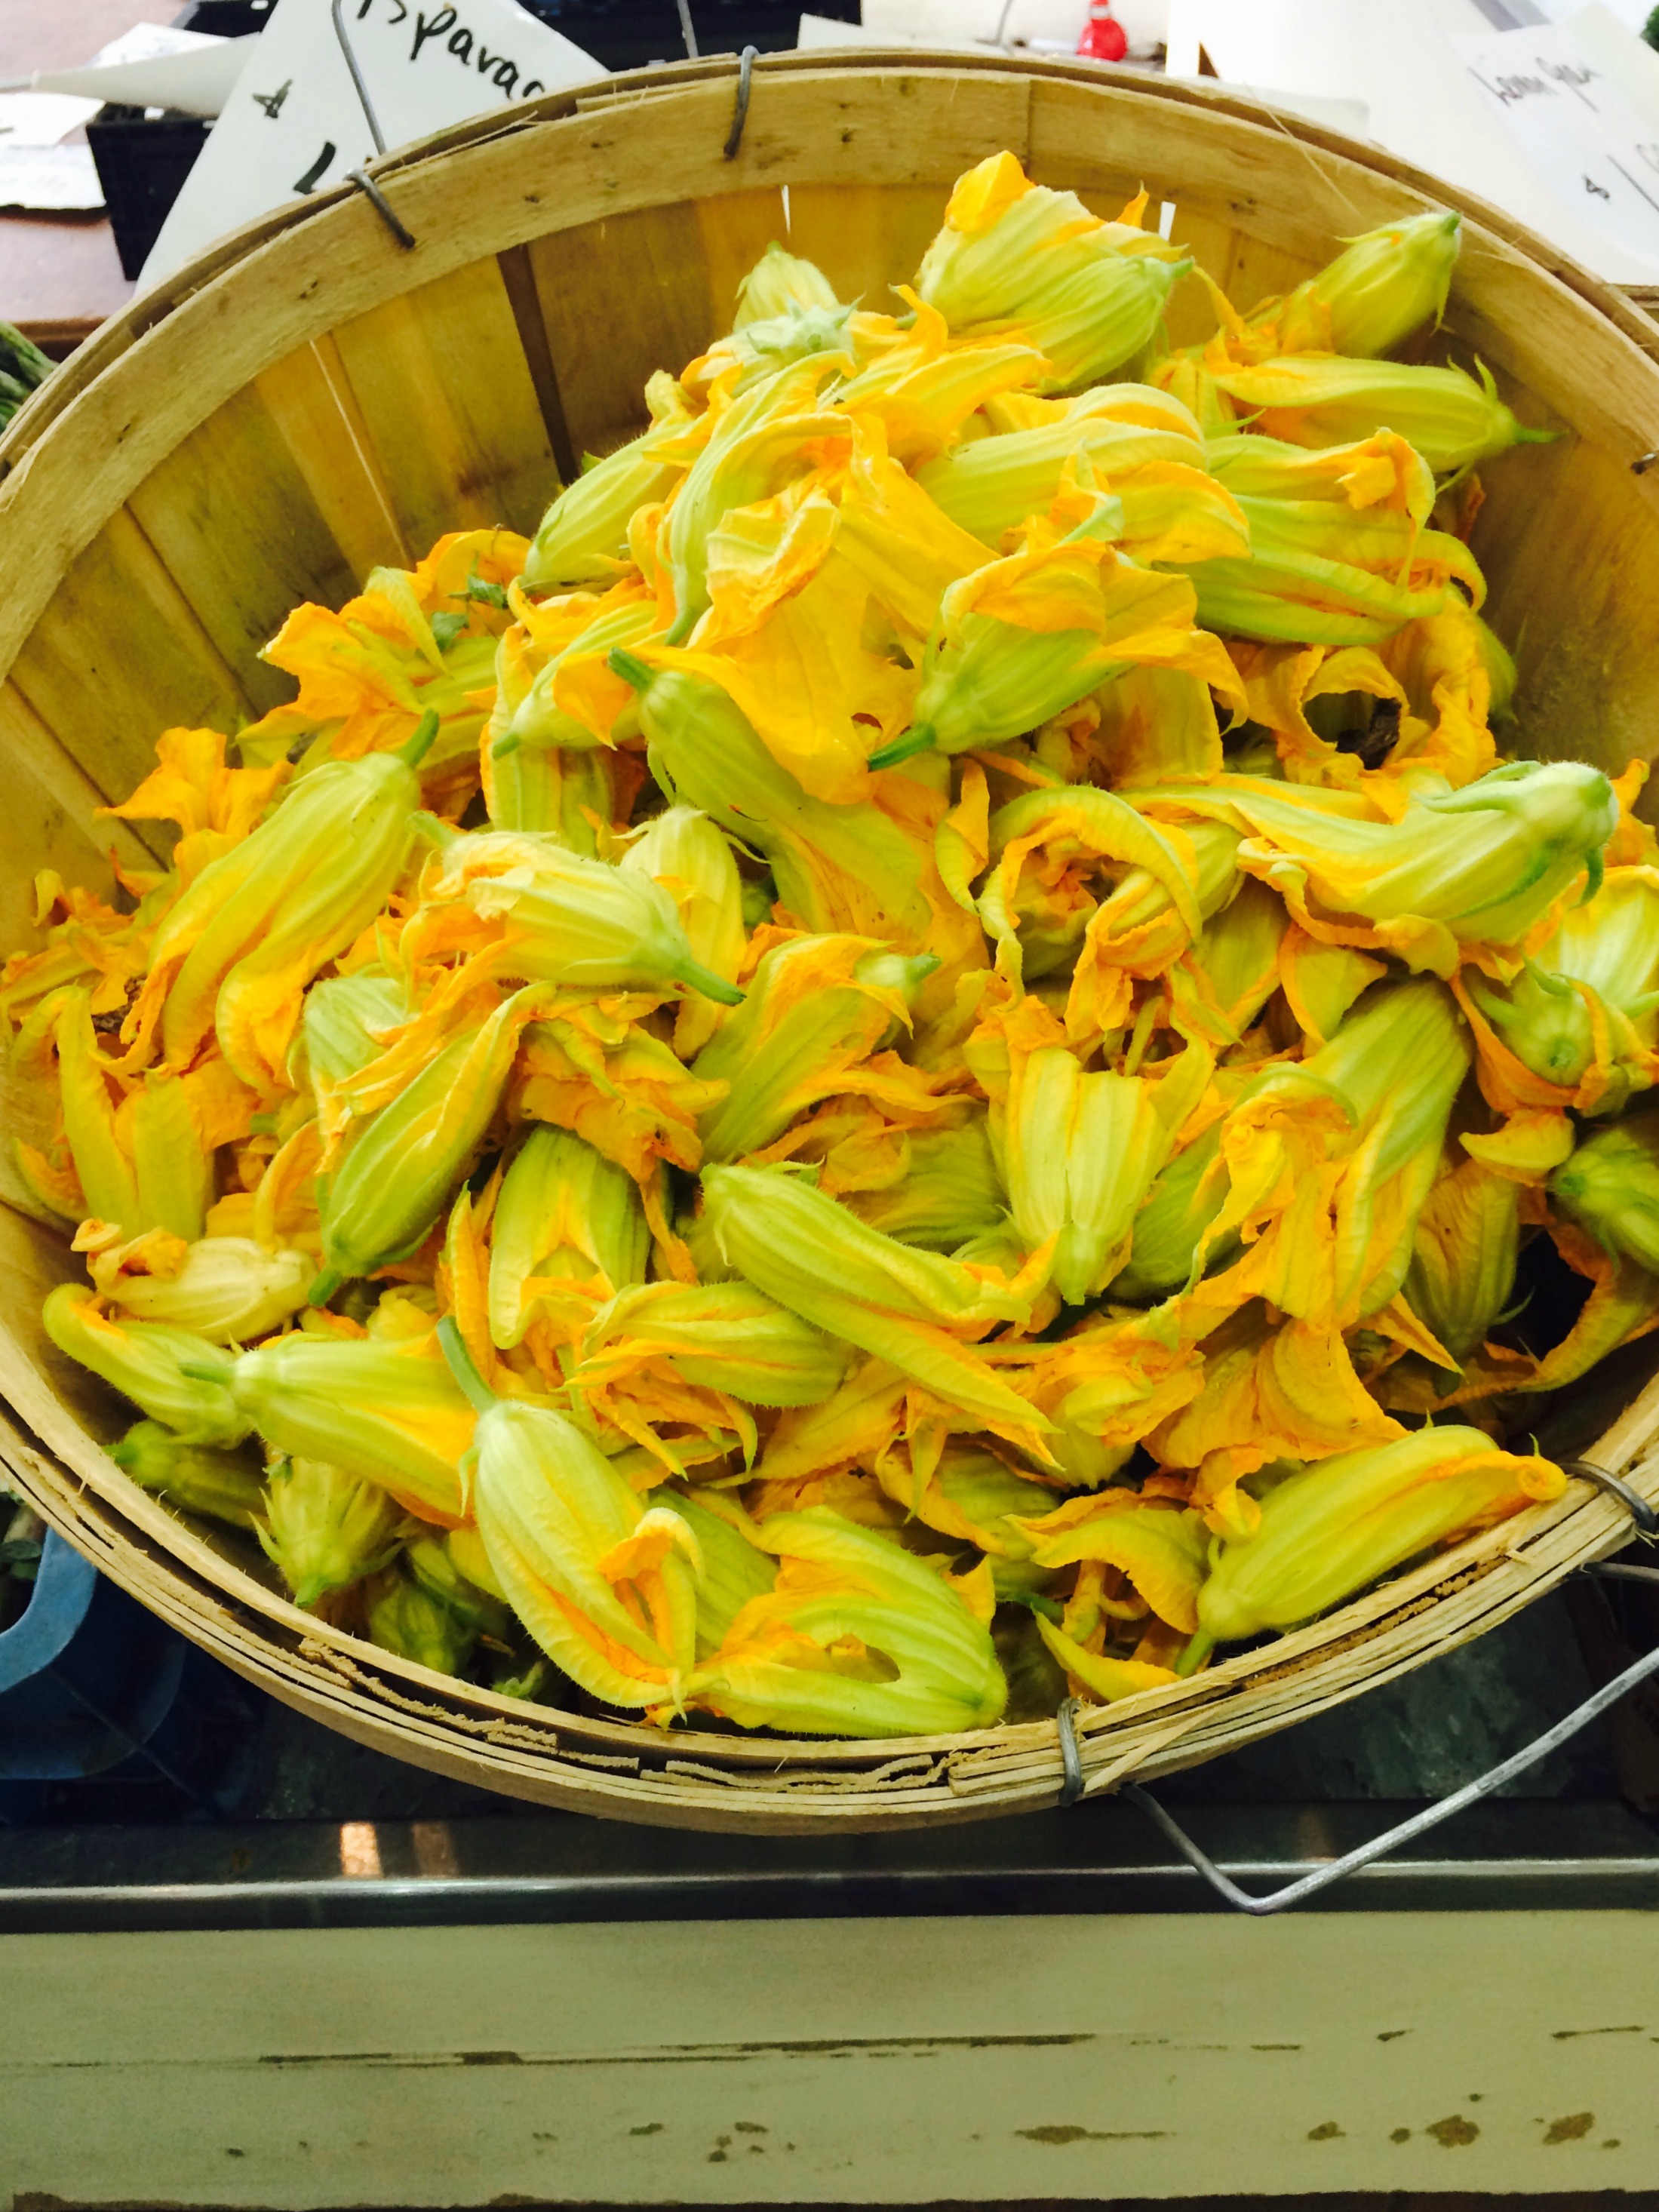 Squash blossoms in basket